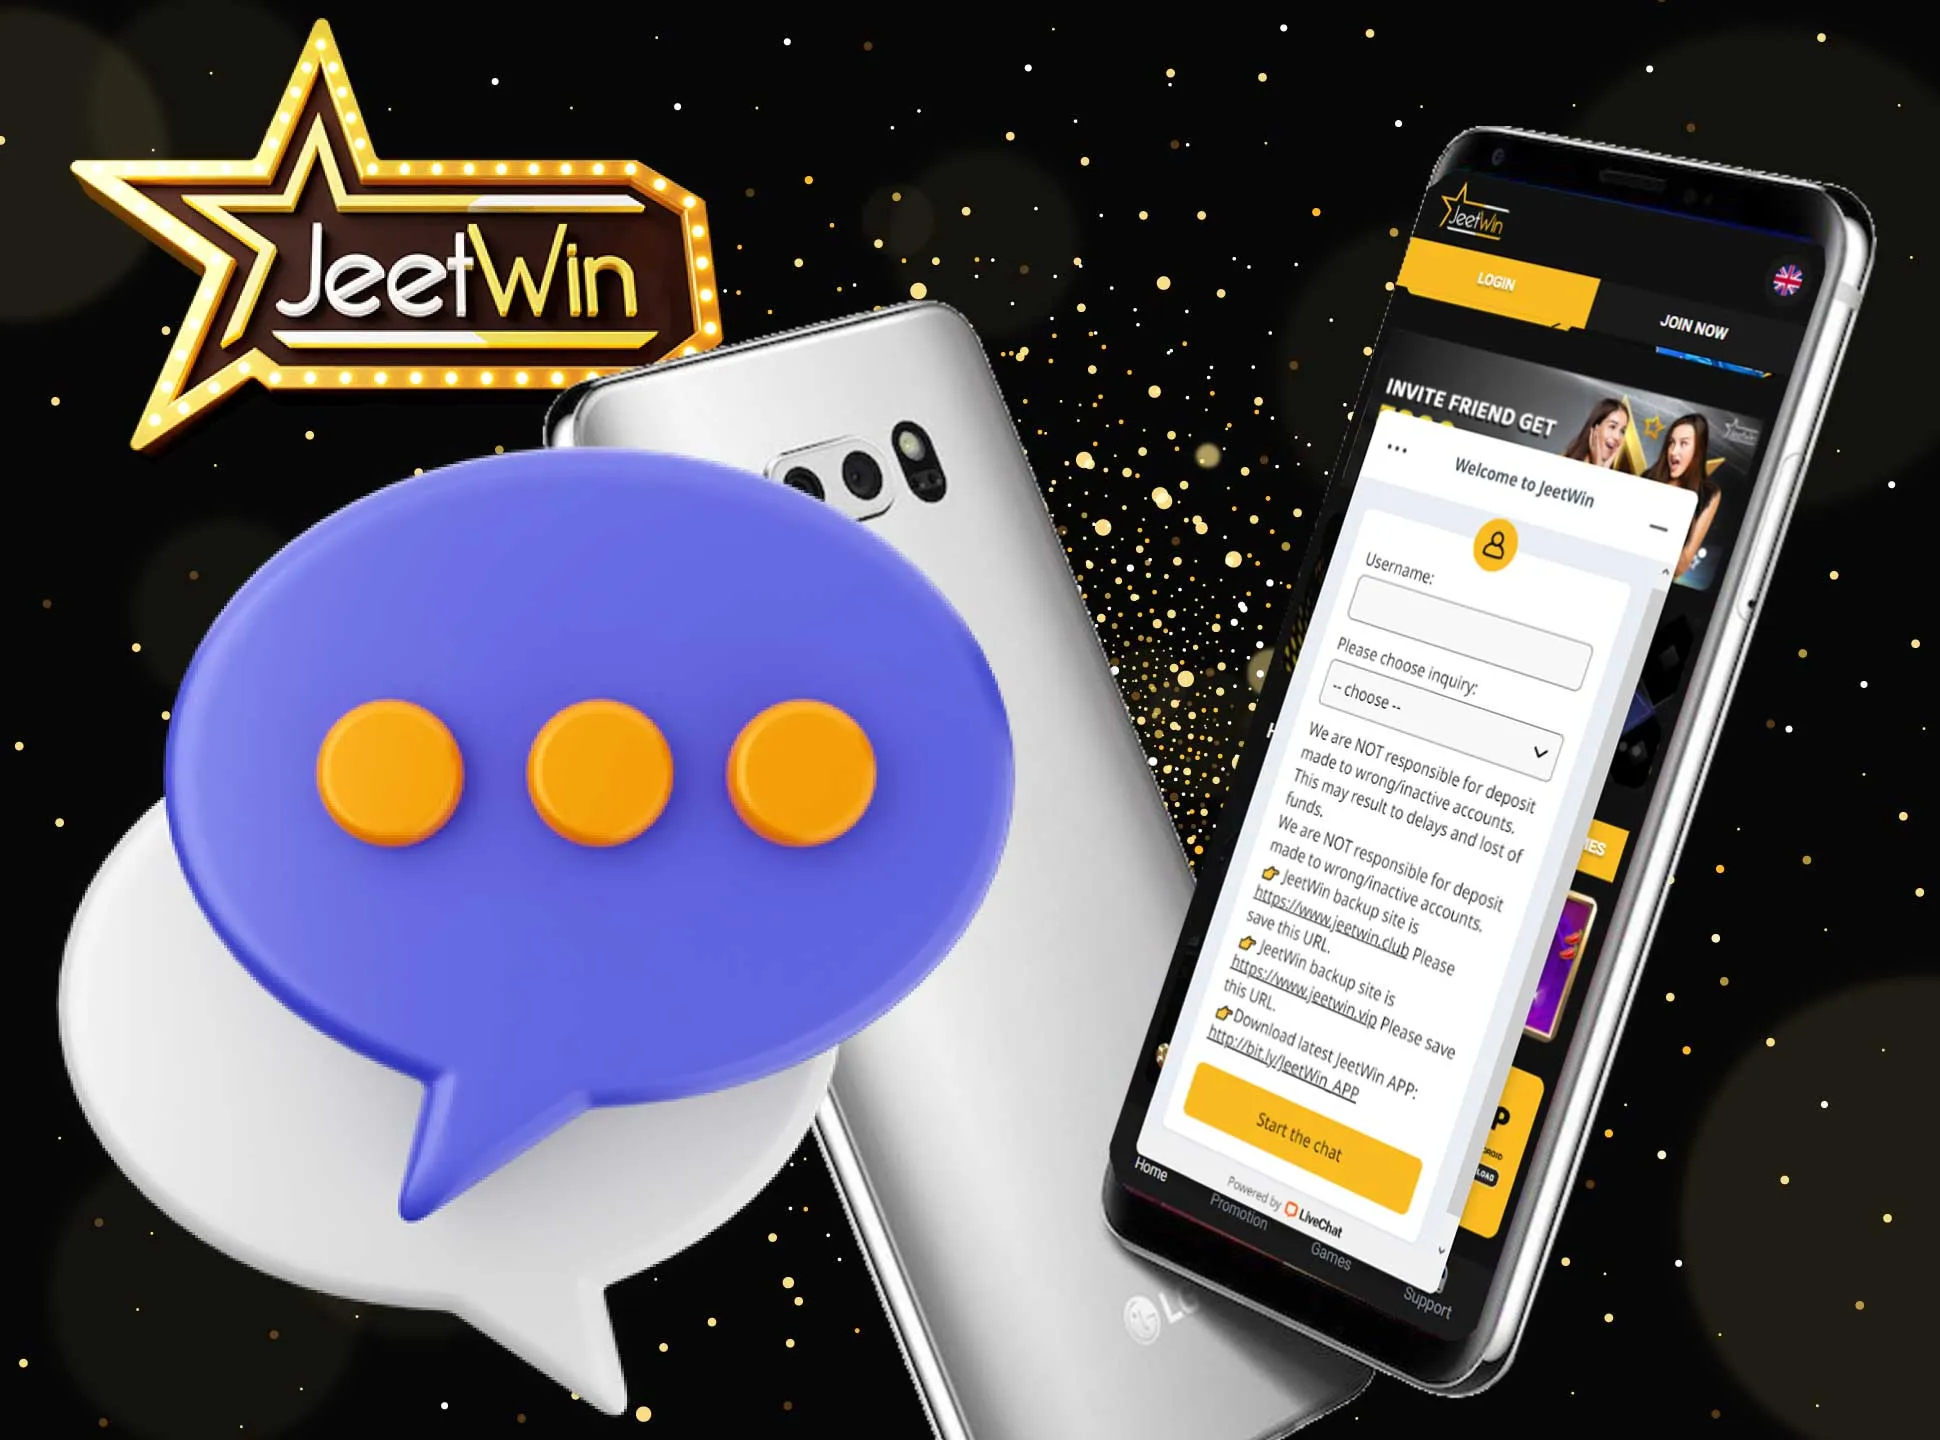 There is a live chat on the Jeetwin site if you need the support team's help.